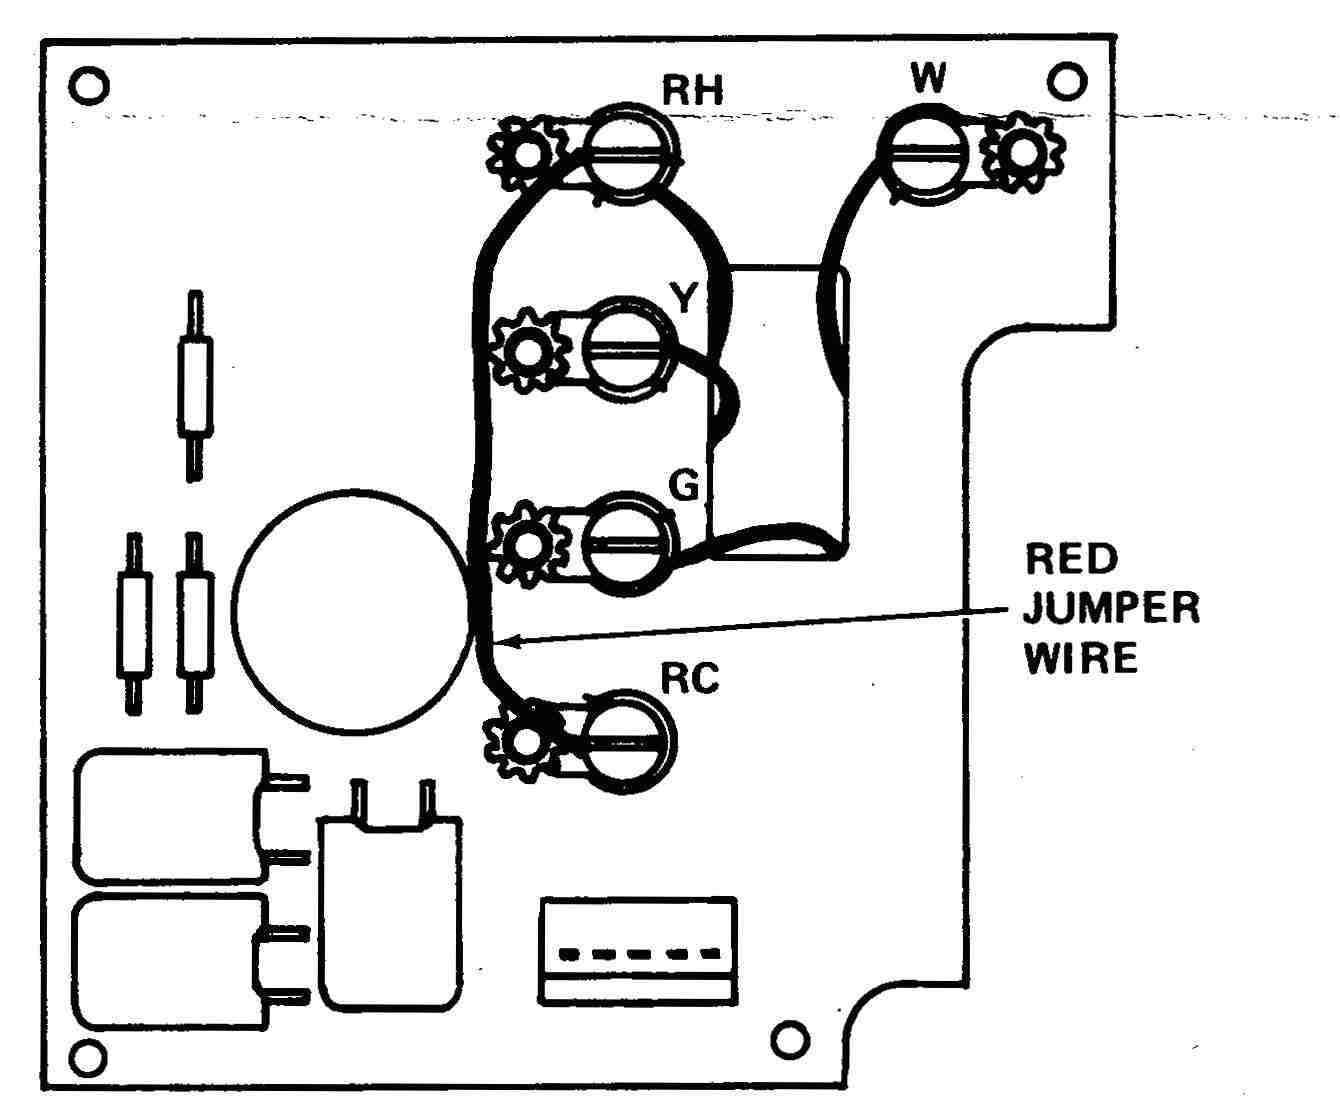 how wire a white rodgers room thermostat white rodgers thermostat white rodgers thermostat wiring diagram 1f82 261 white rodgers wiring diagram